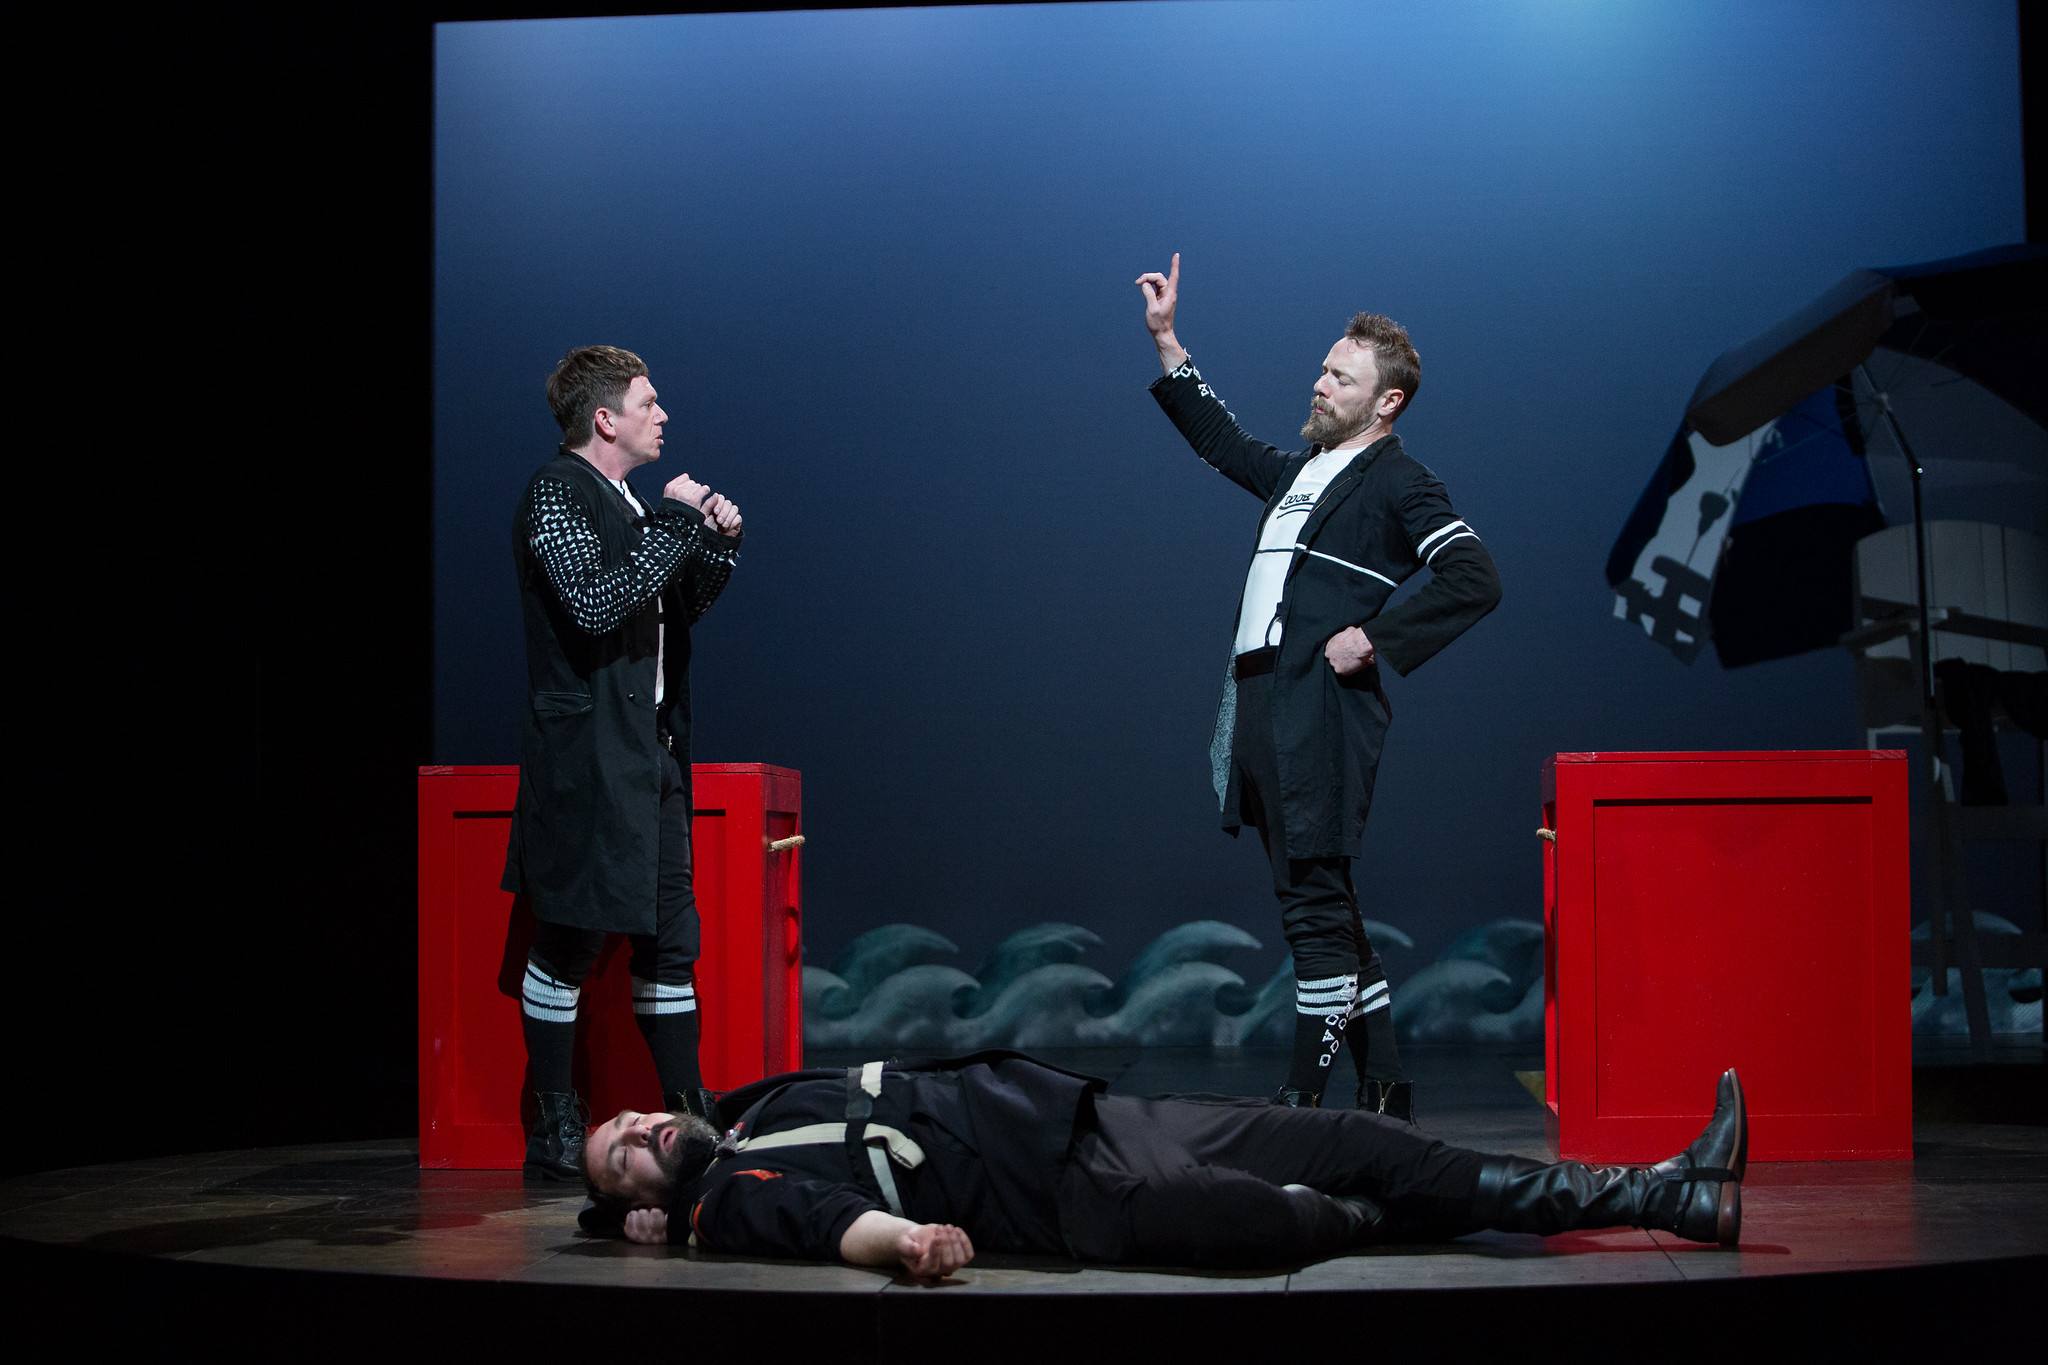 rosencrantz and guildenstern are dead by tom stoppard